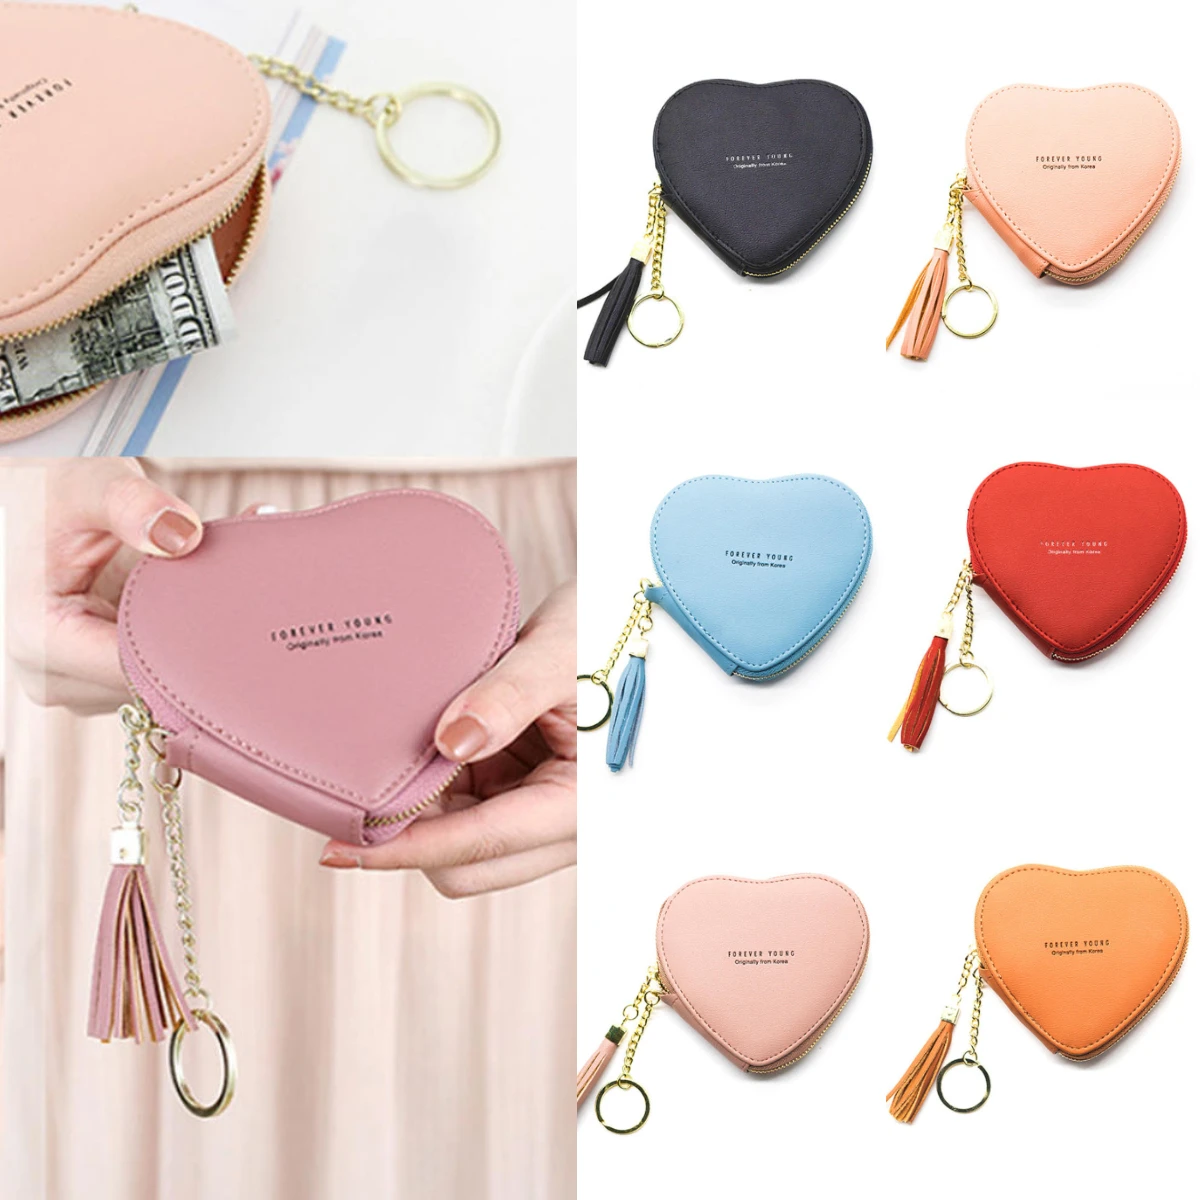 CATMICOO Small Heart Shaped Purse for Women with Removable Crossbody Strap